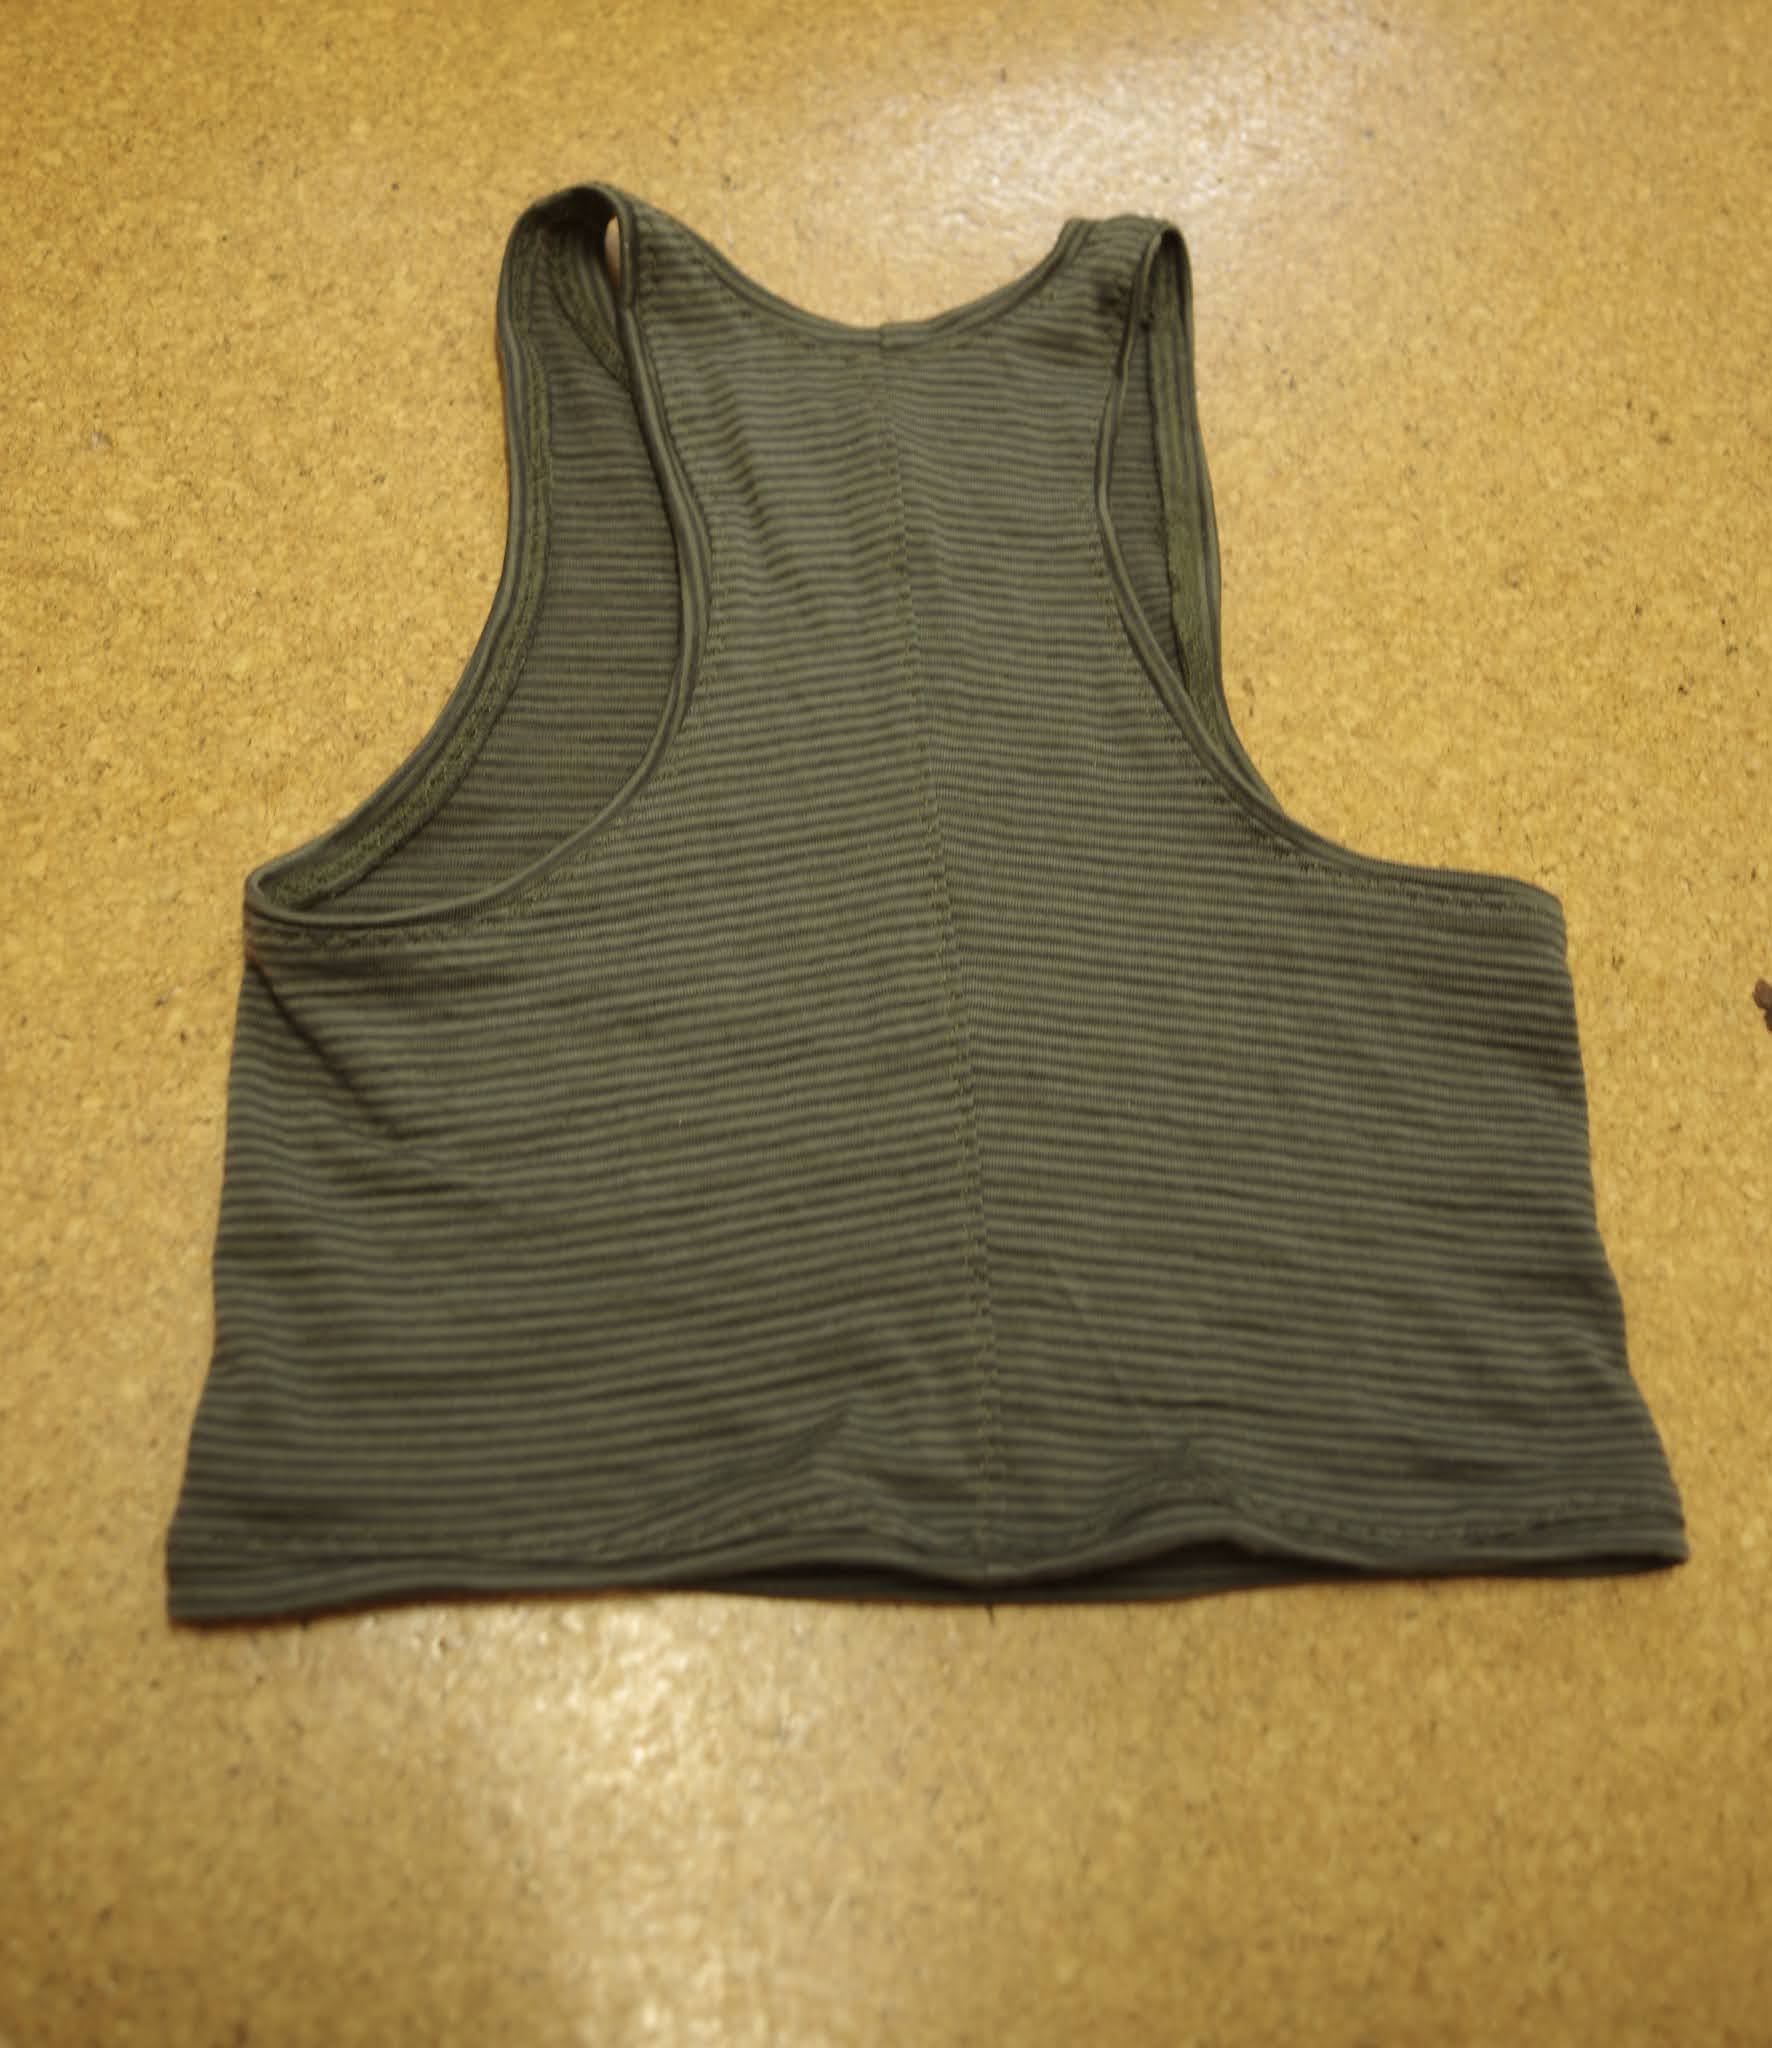 begonia sews: Sophie Hines axis tank review